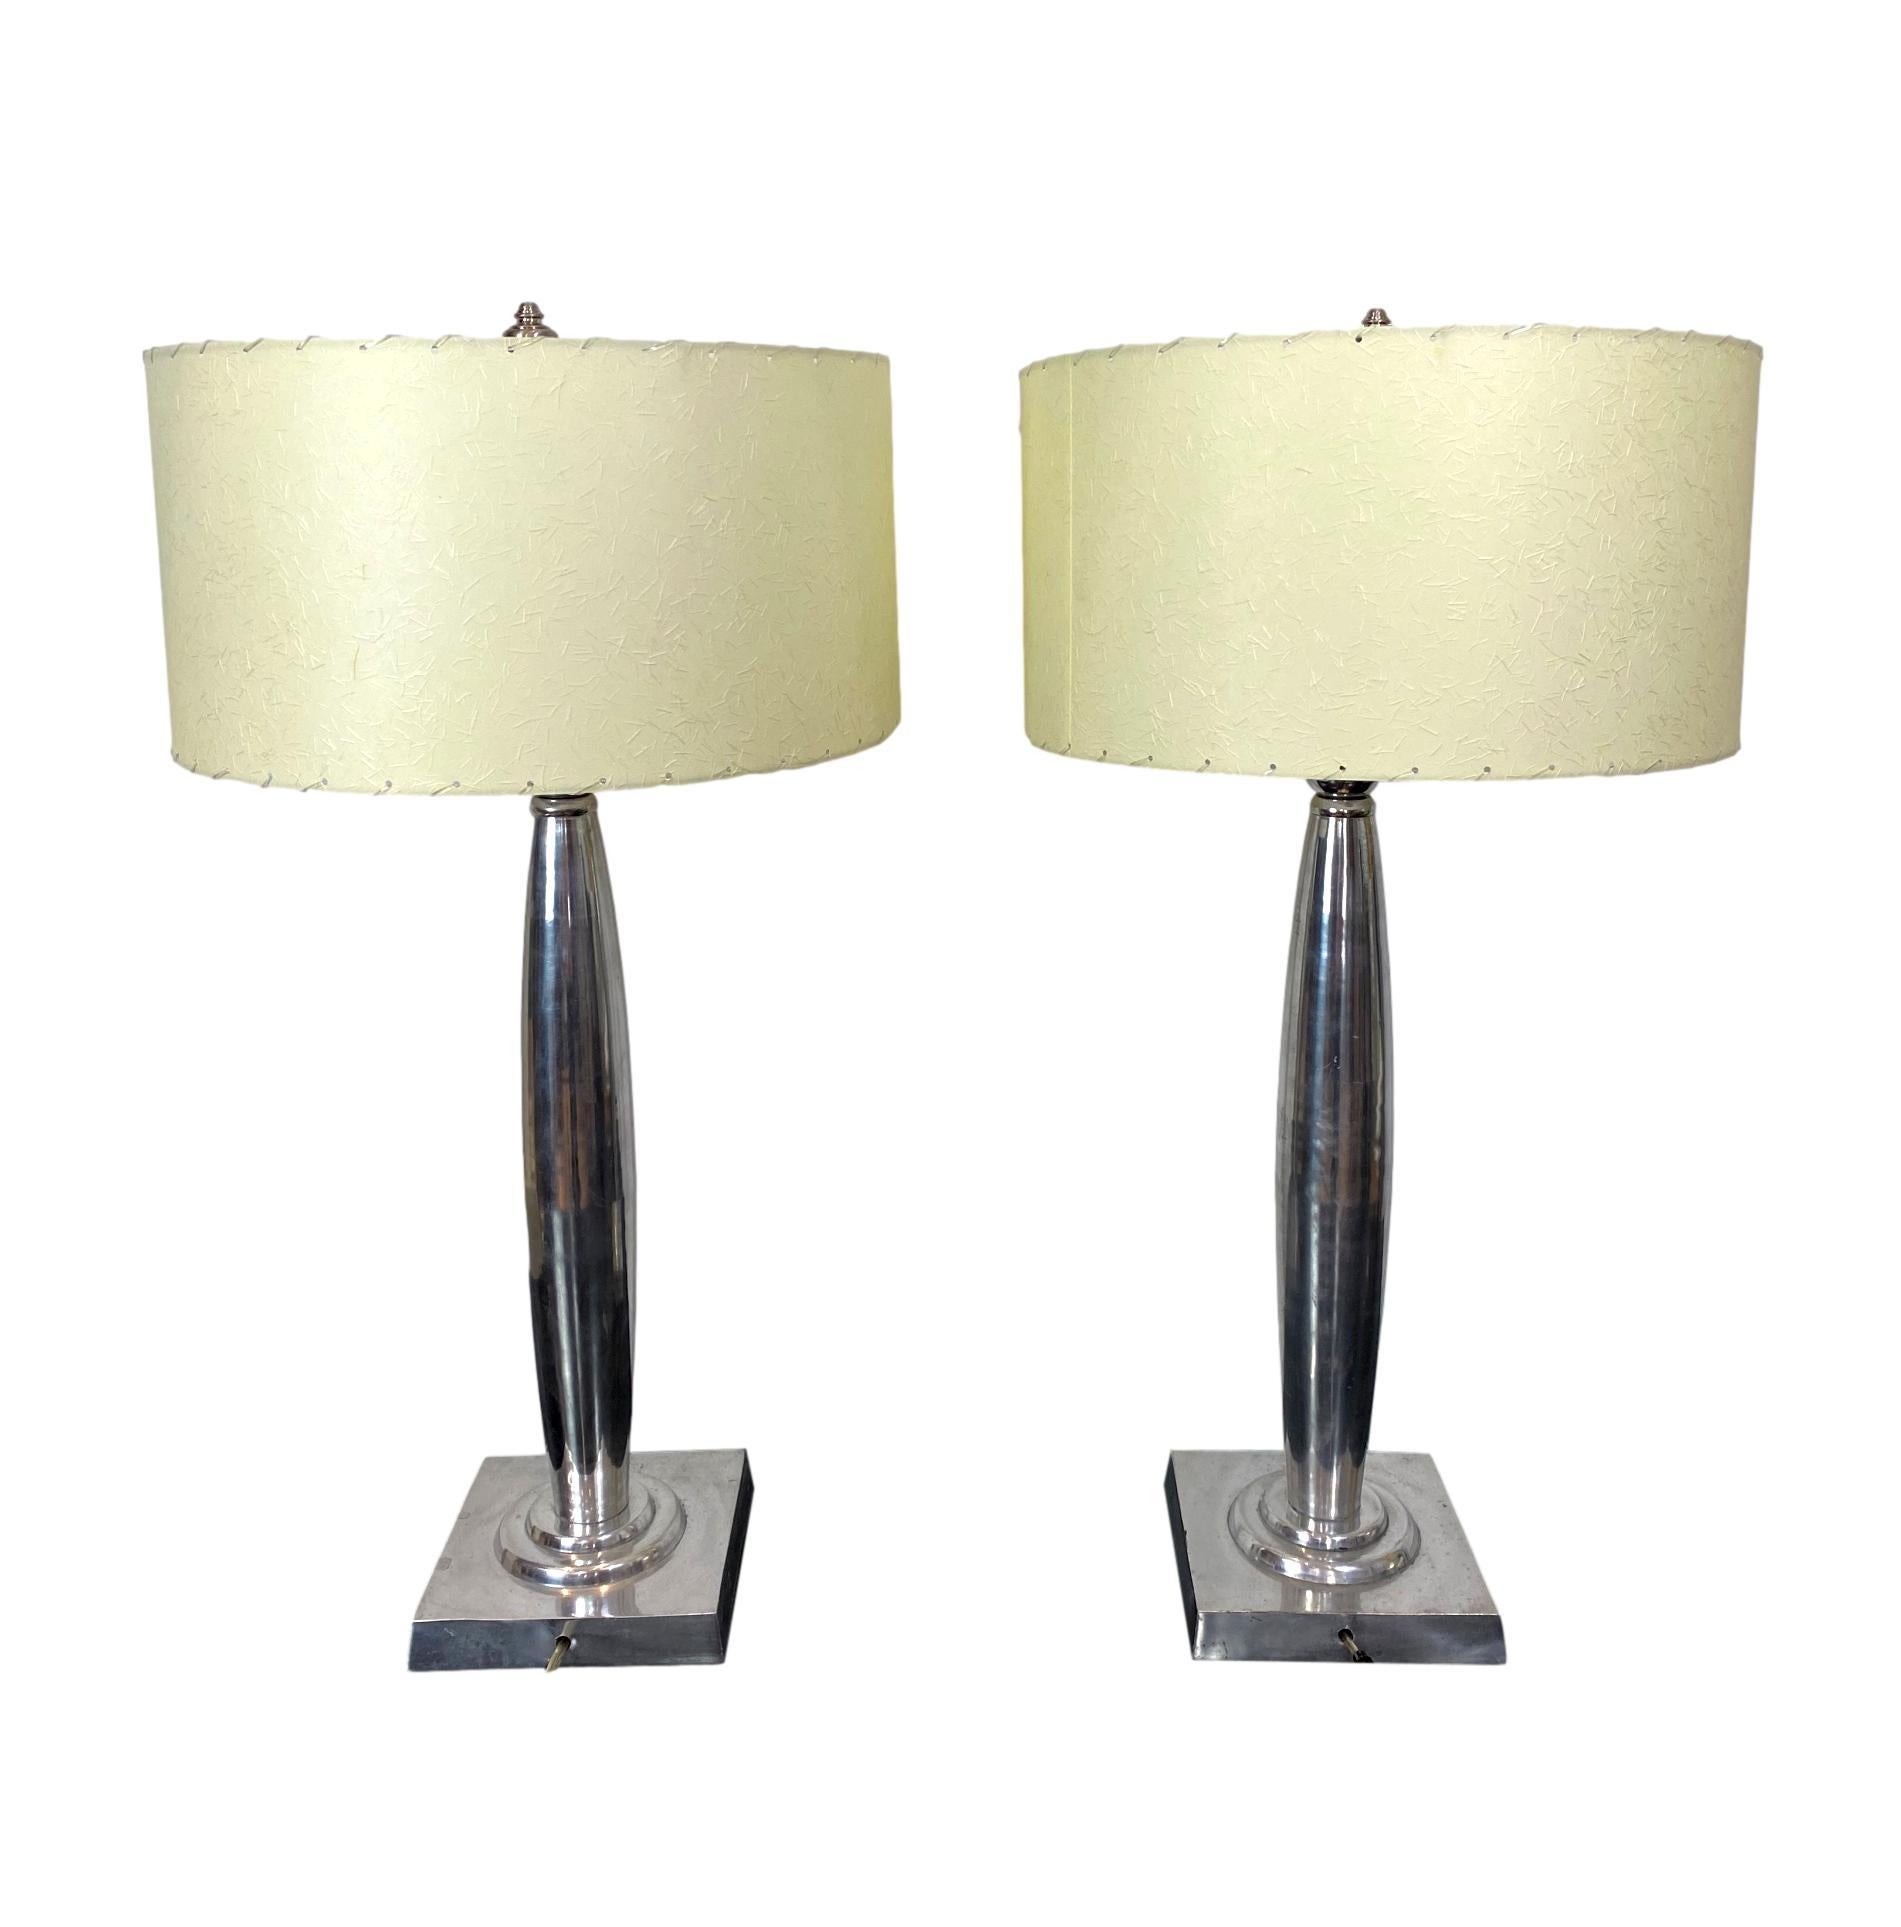 Pair Mid-Century Modern aluminum table lamps, French, ca. 1960's, with new hand-sewn custom-made, laced shades, 33 inches high.